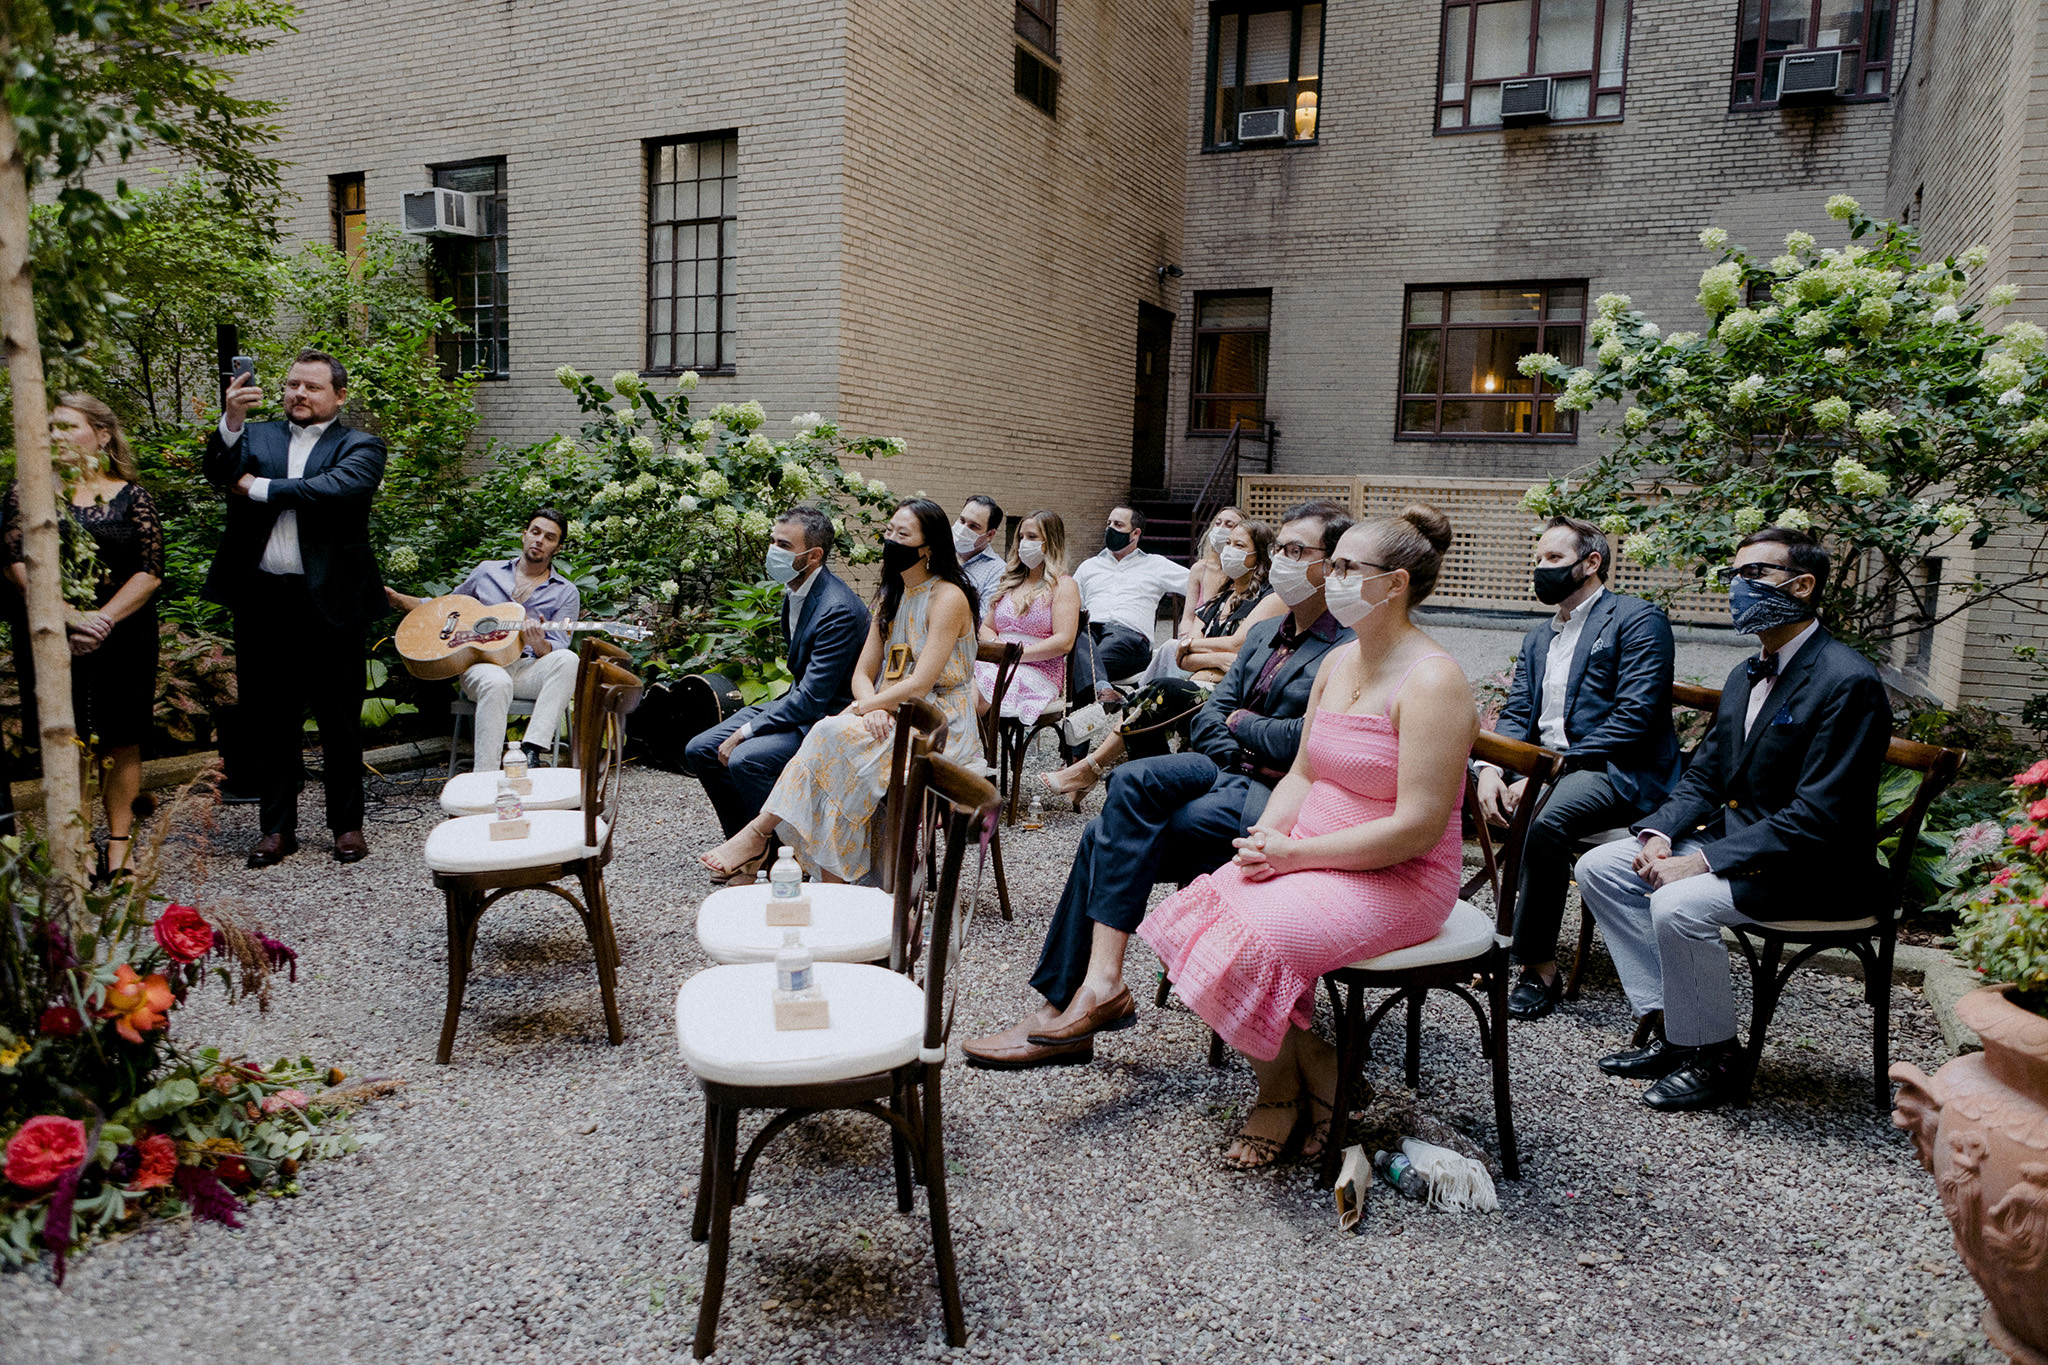 Socially distanced seating at a wedding ceremony